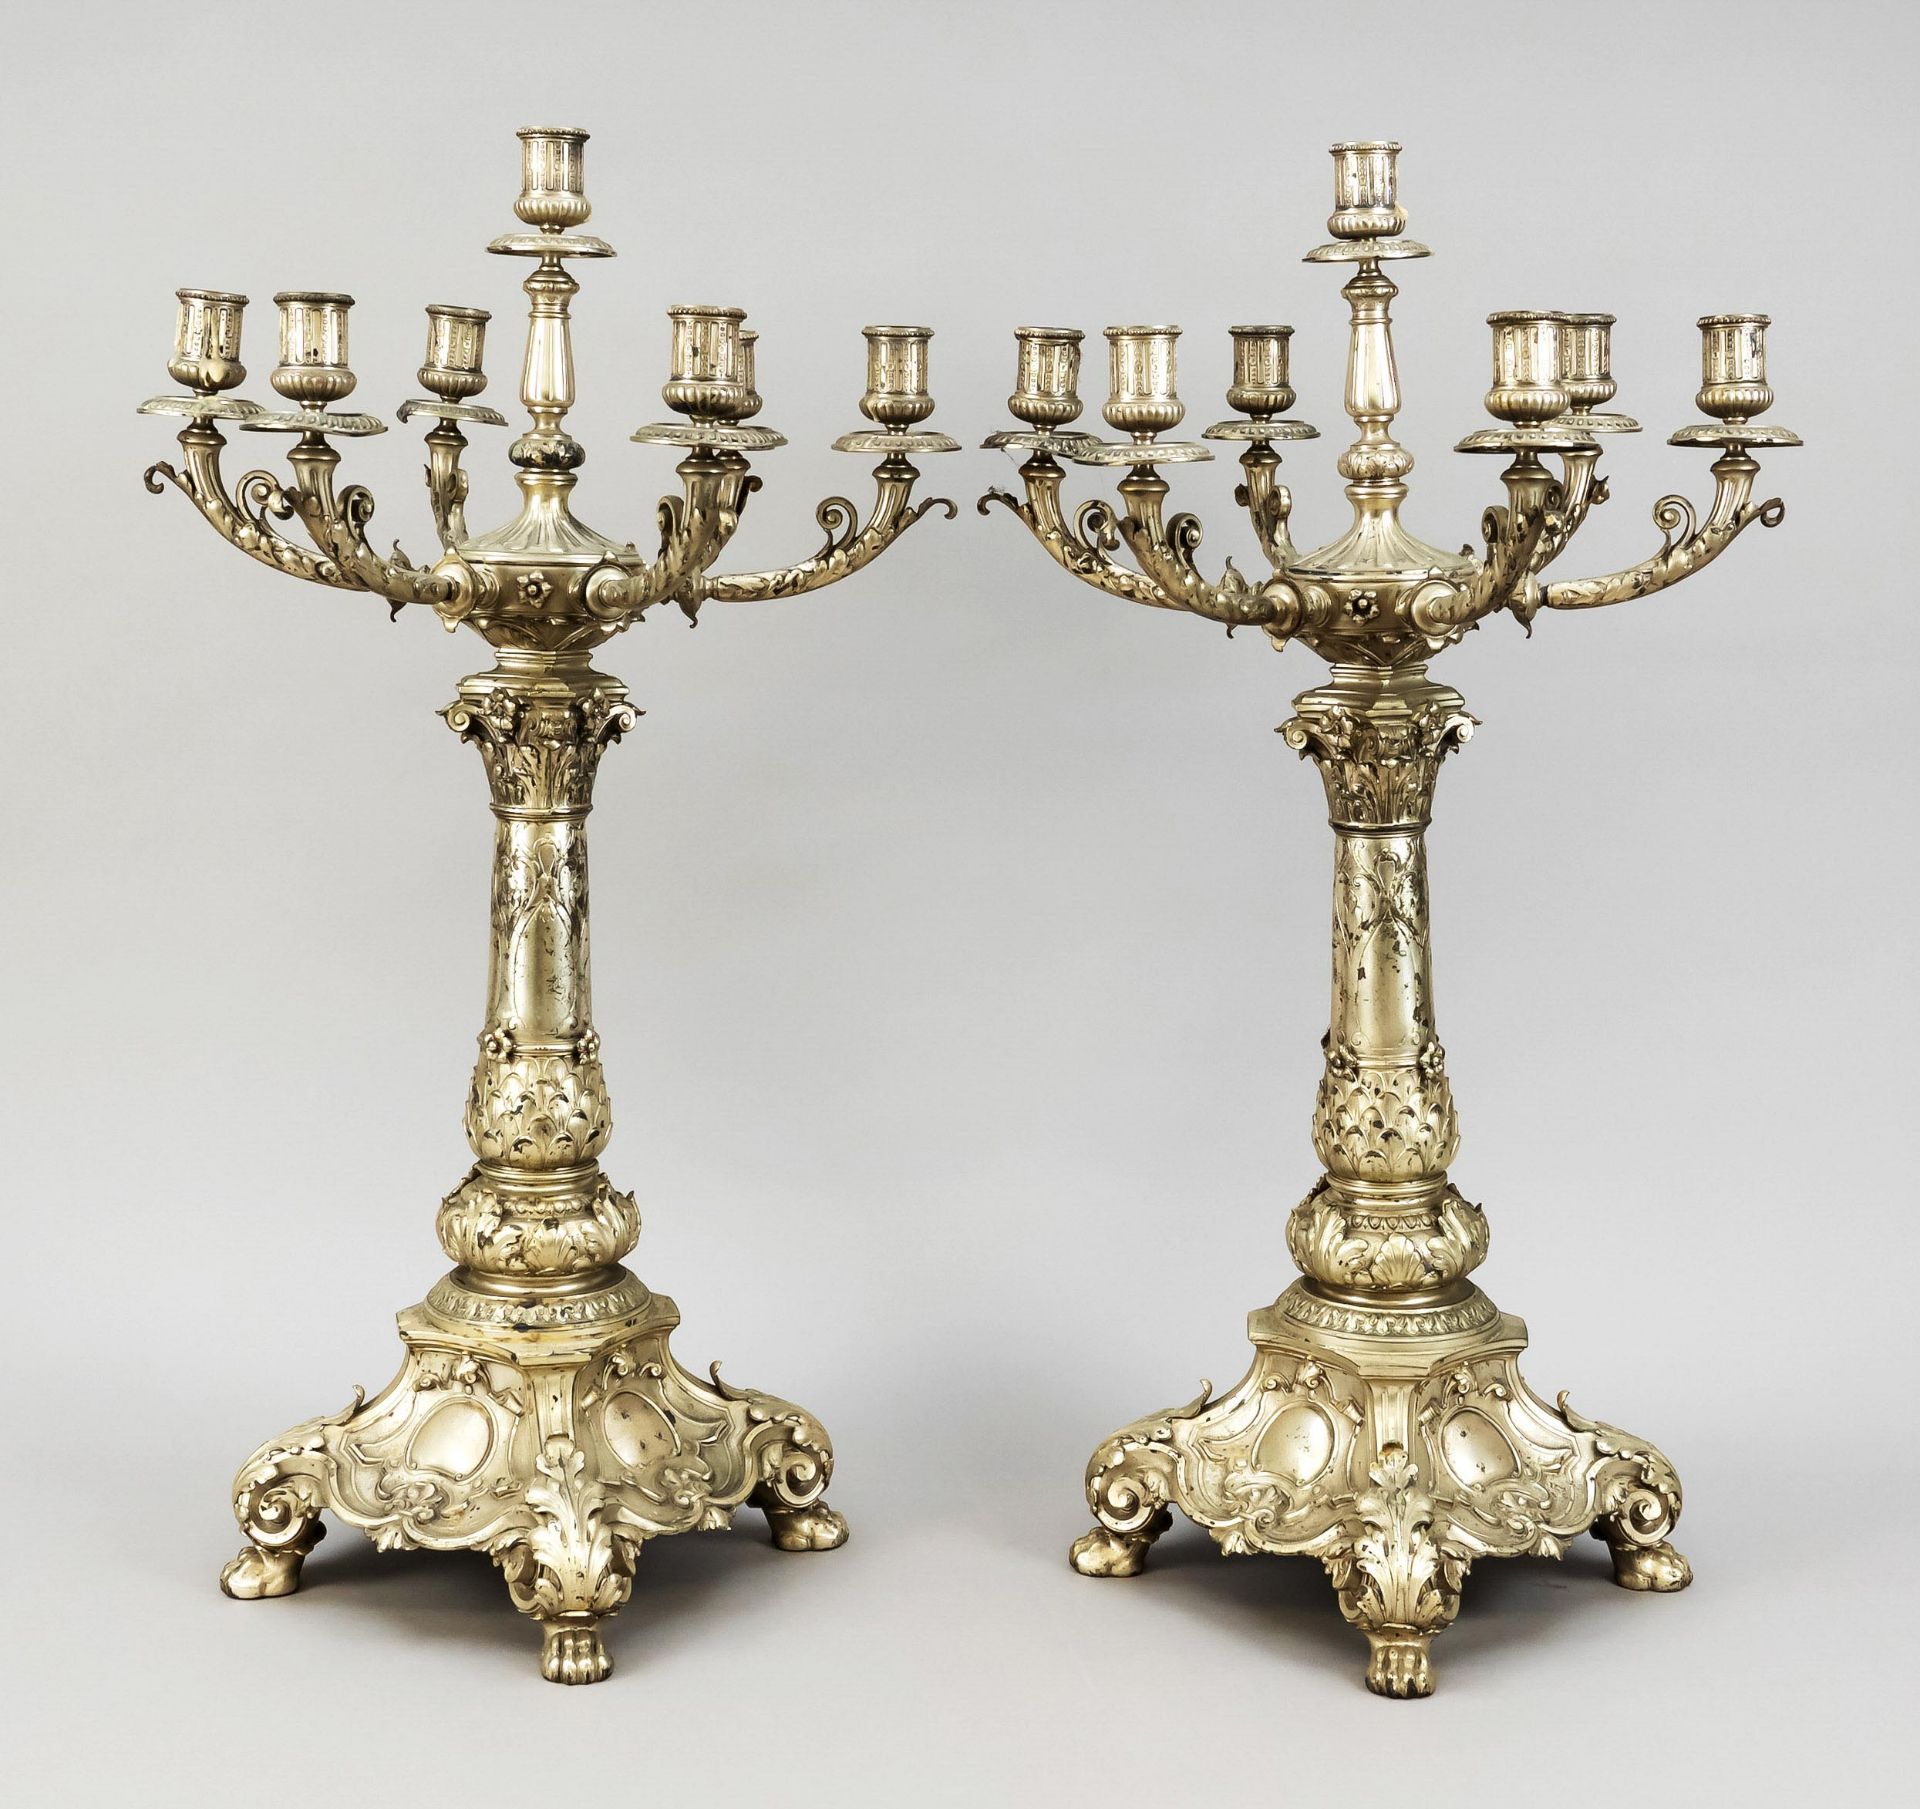 Pair of large seven-flame girandoles, German, maker's mark Sy & Wagner, Berlin, silver 800/000, each